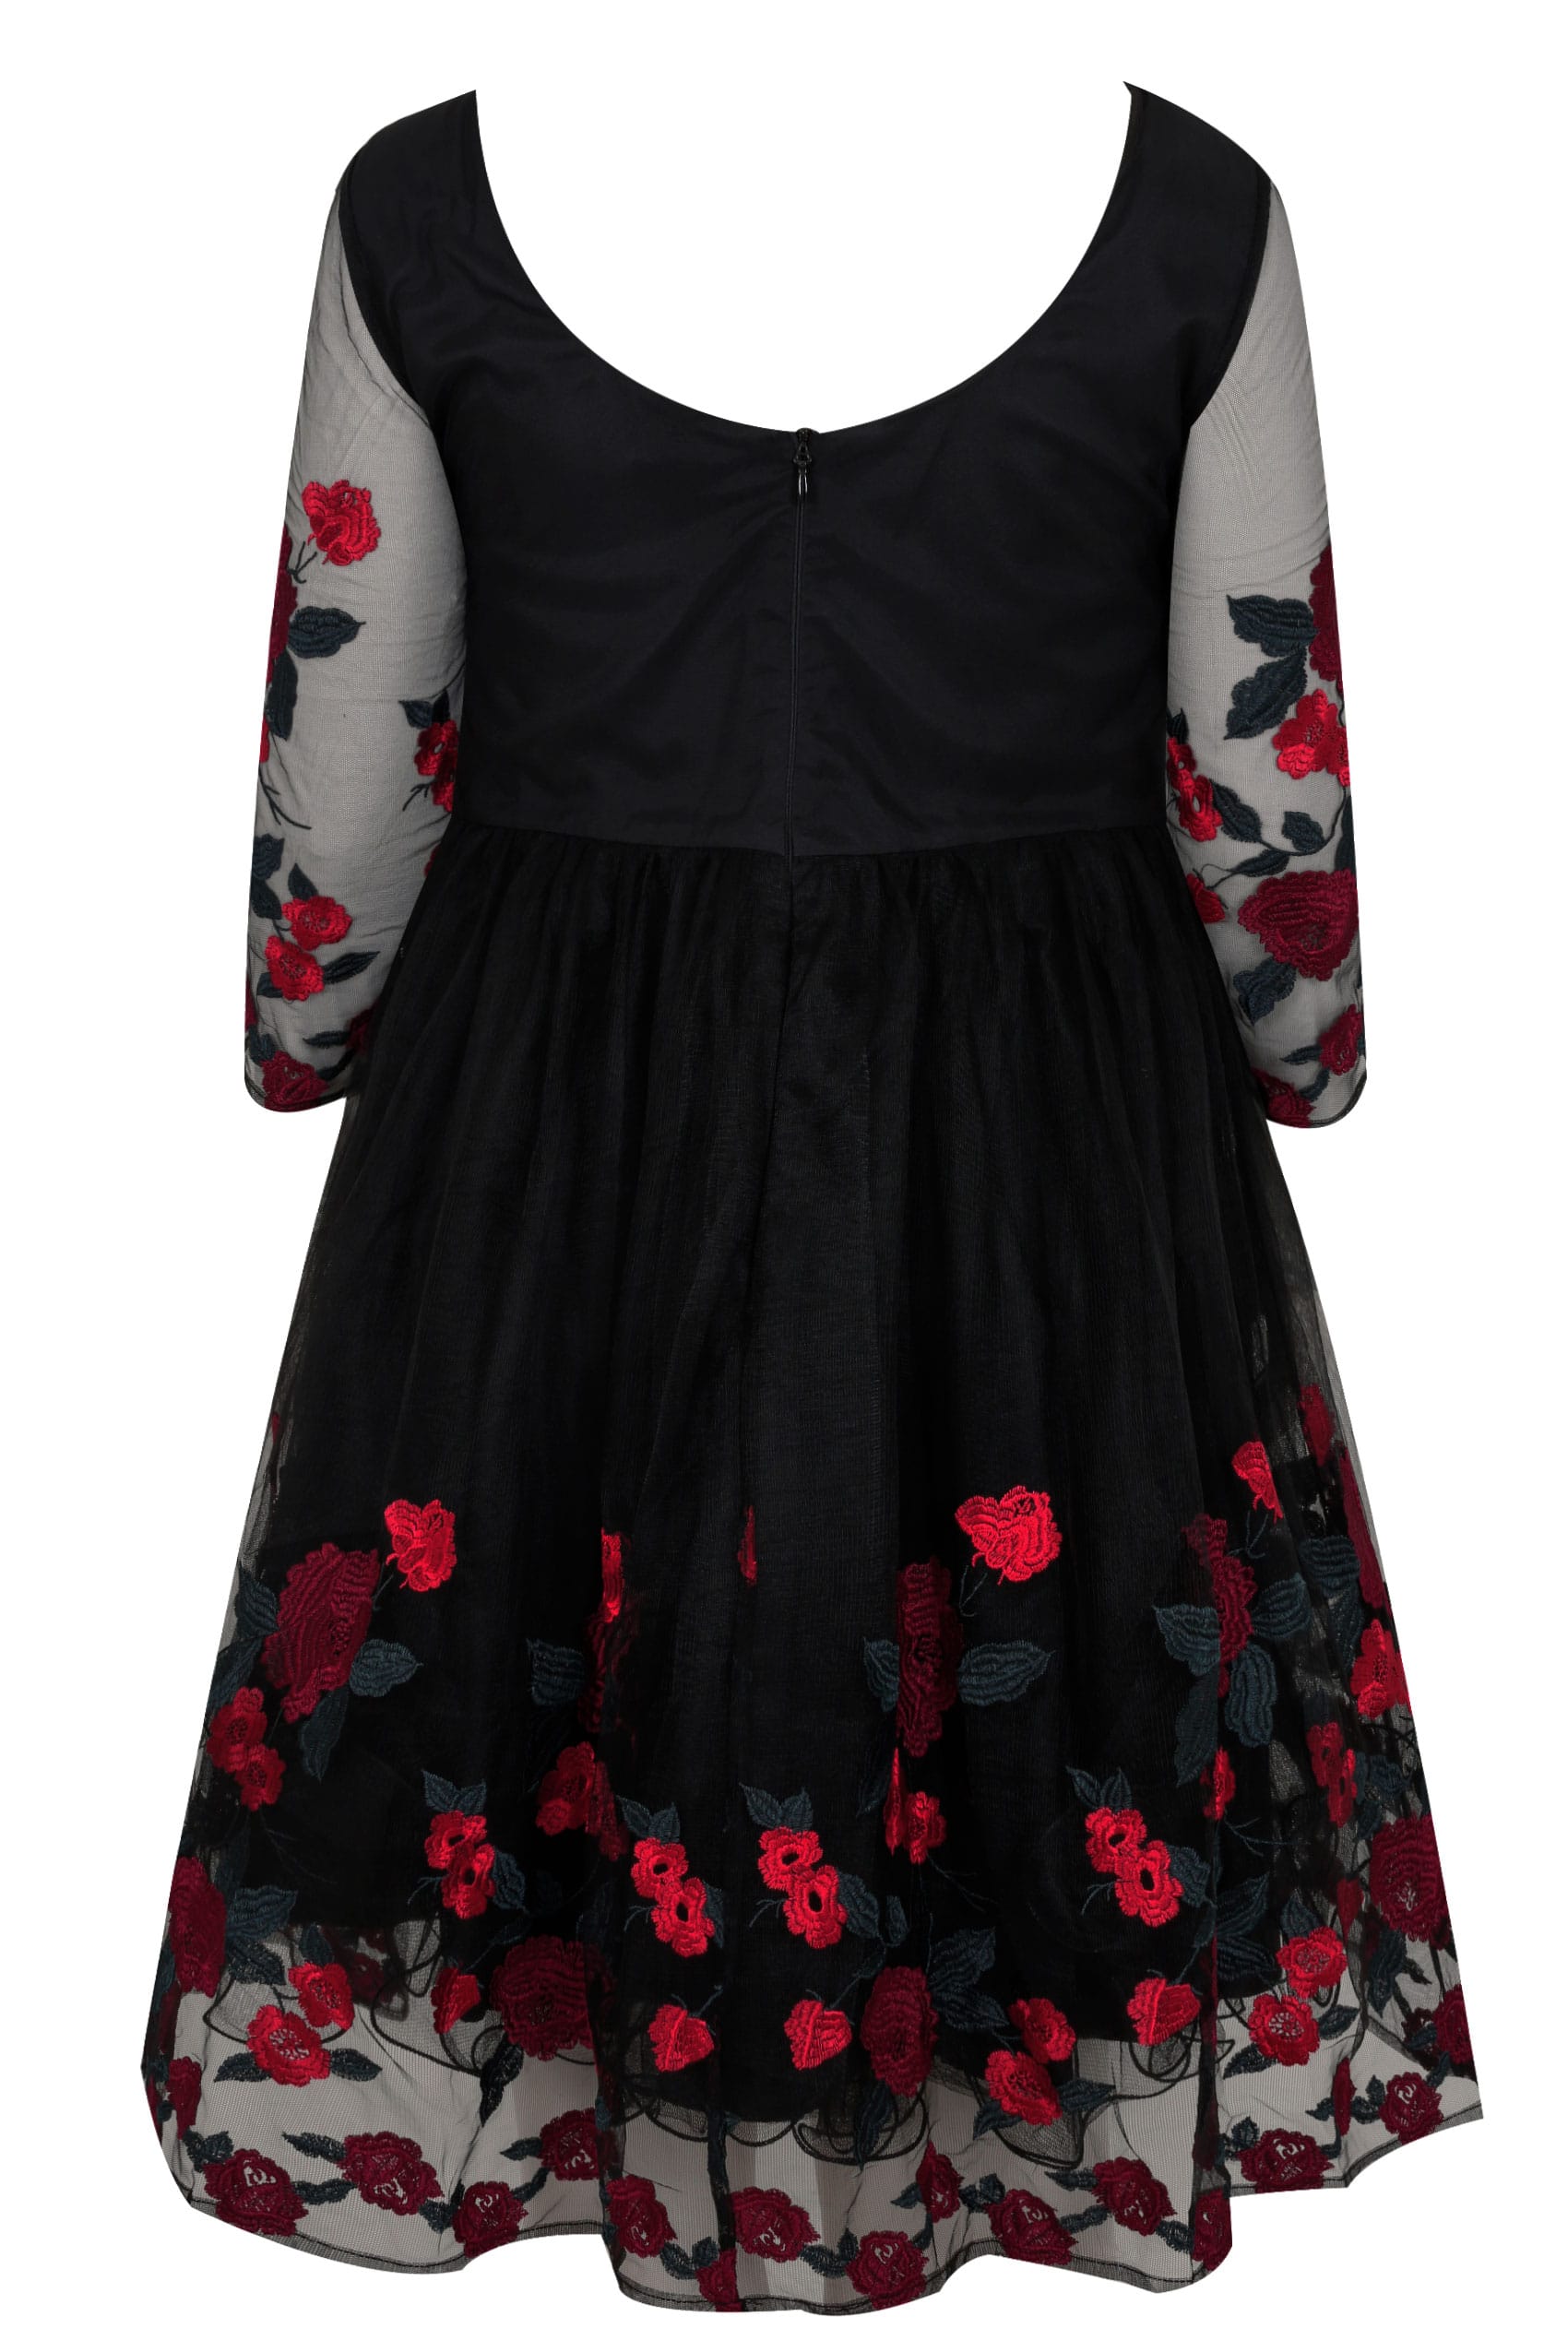 CHI CHI Black Caitlyn Rose Embroidered Dress With Mesh 